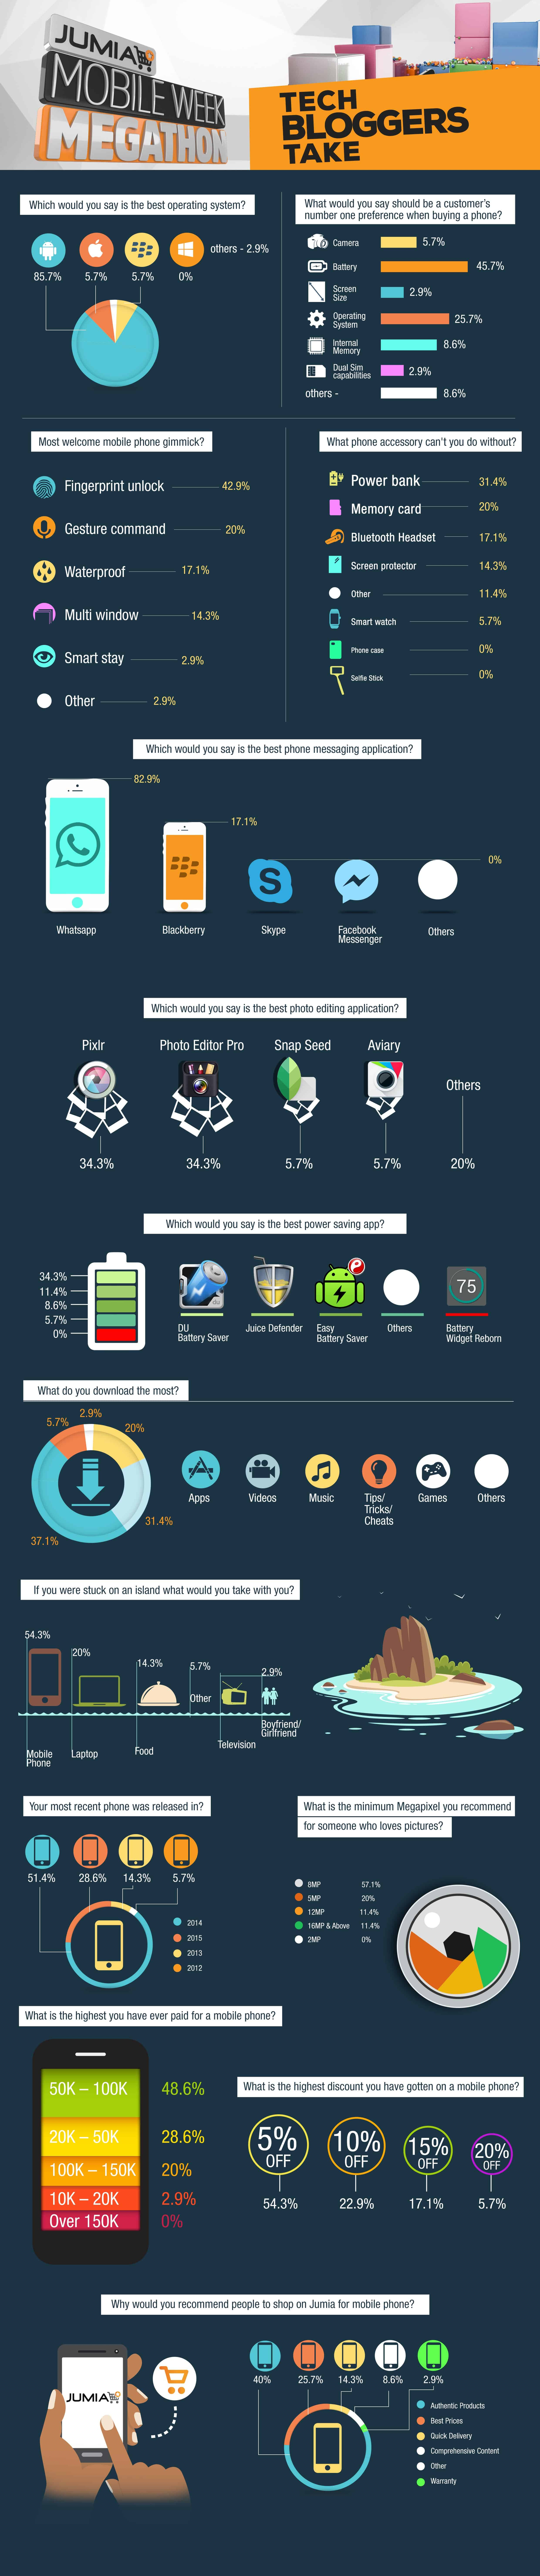 Bloggers Know better mobile Infographic